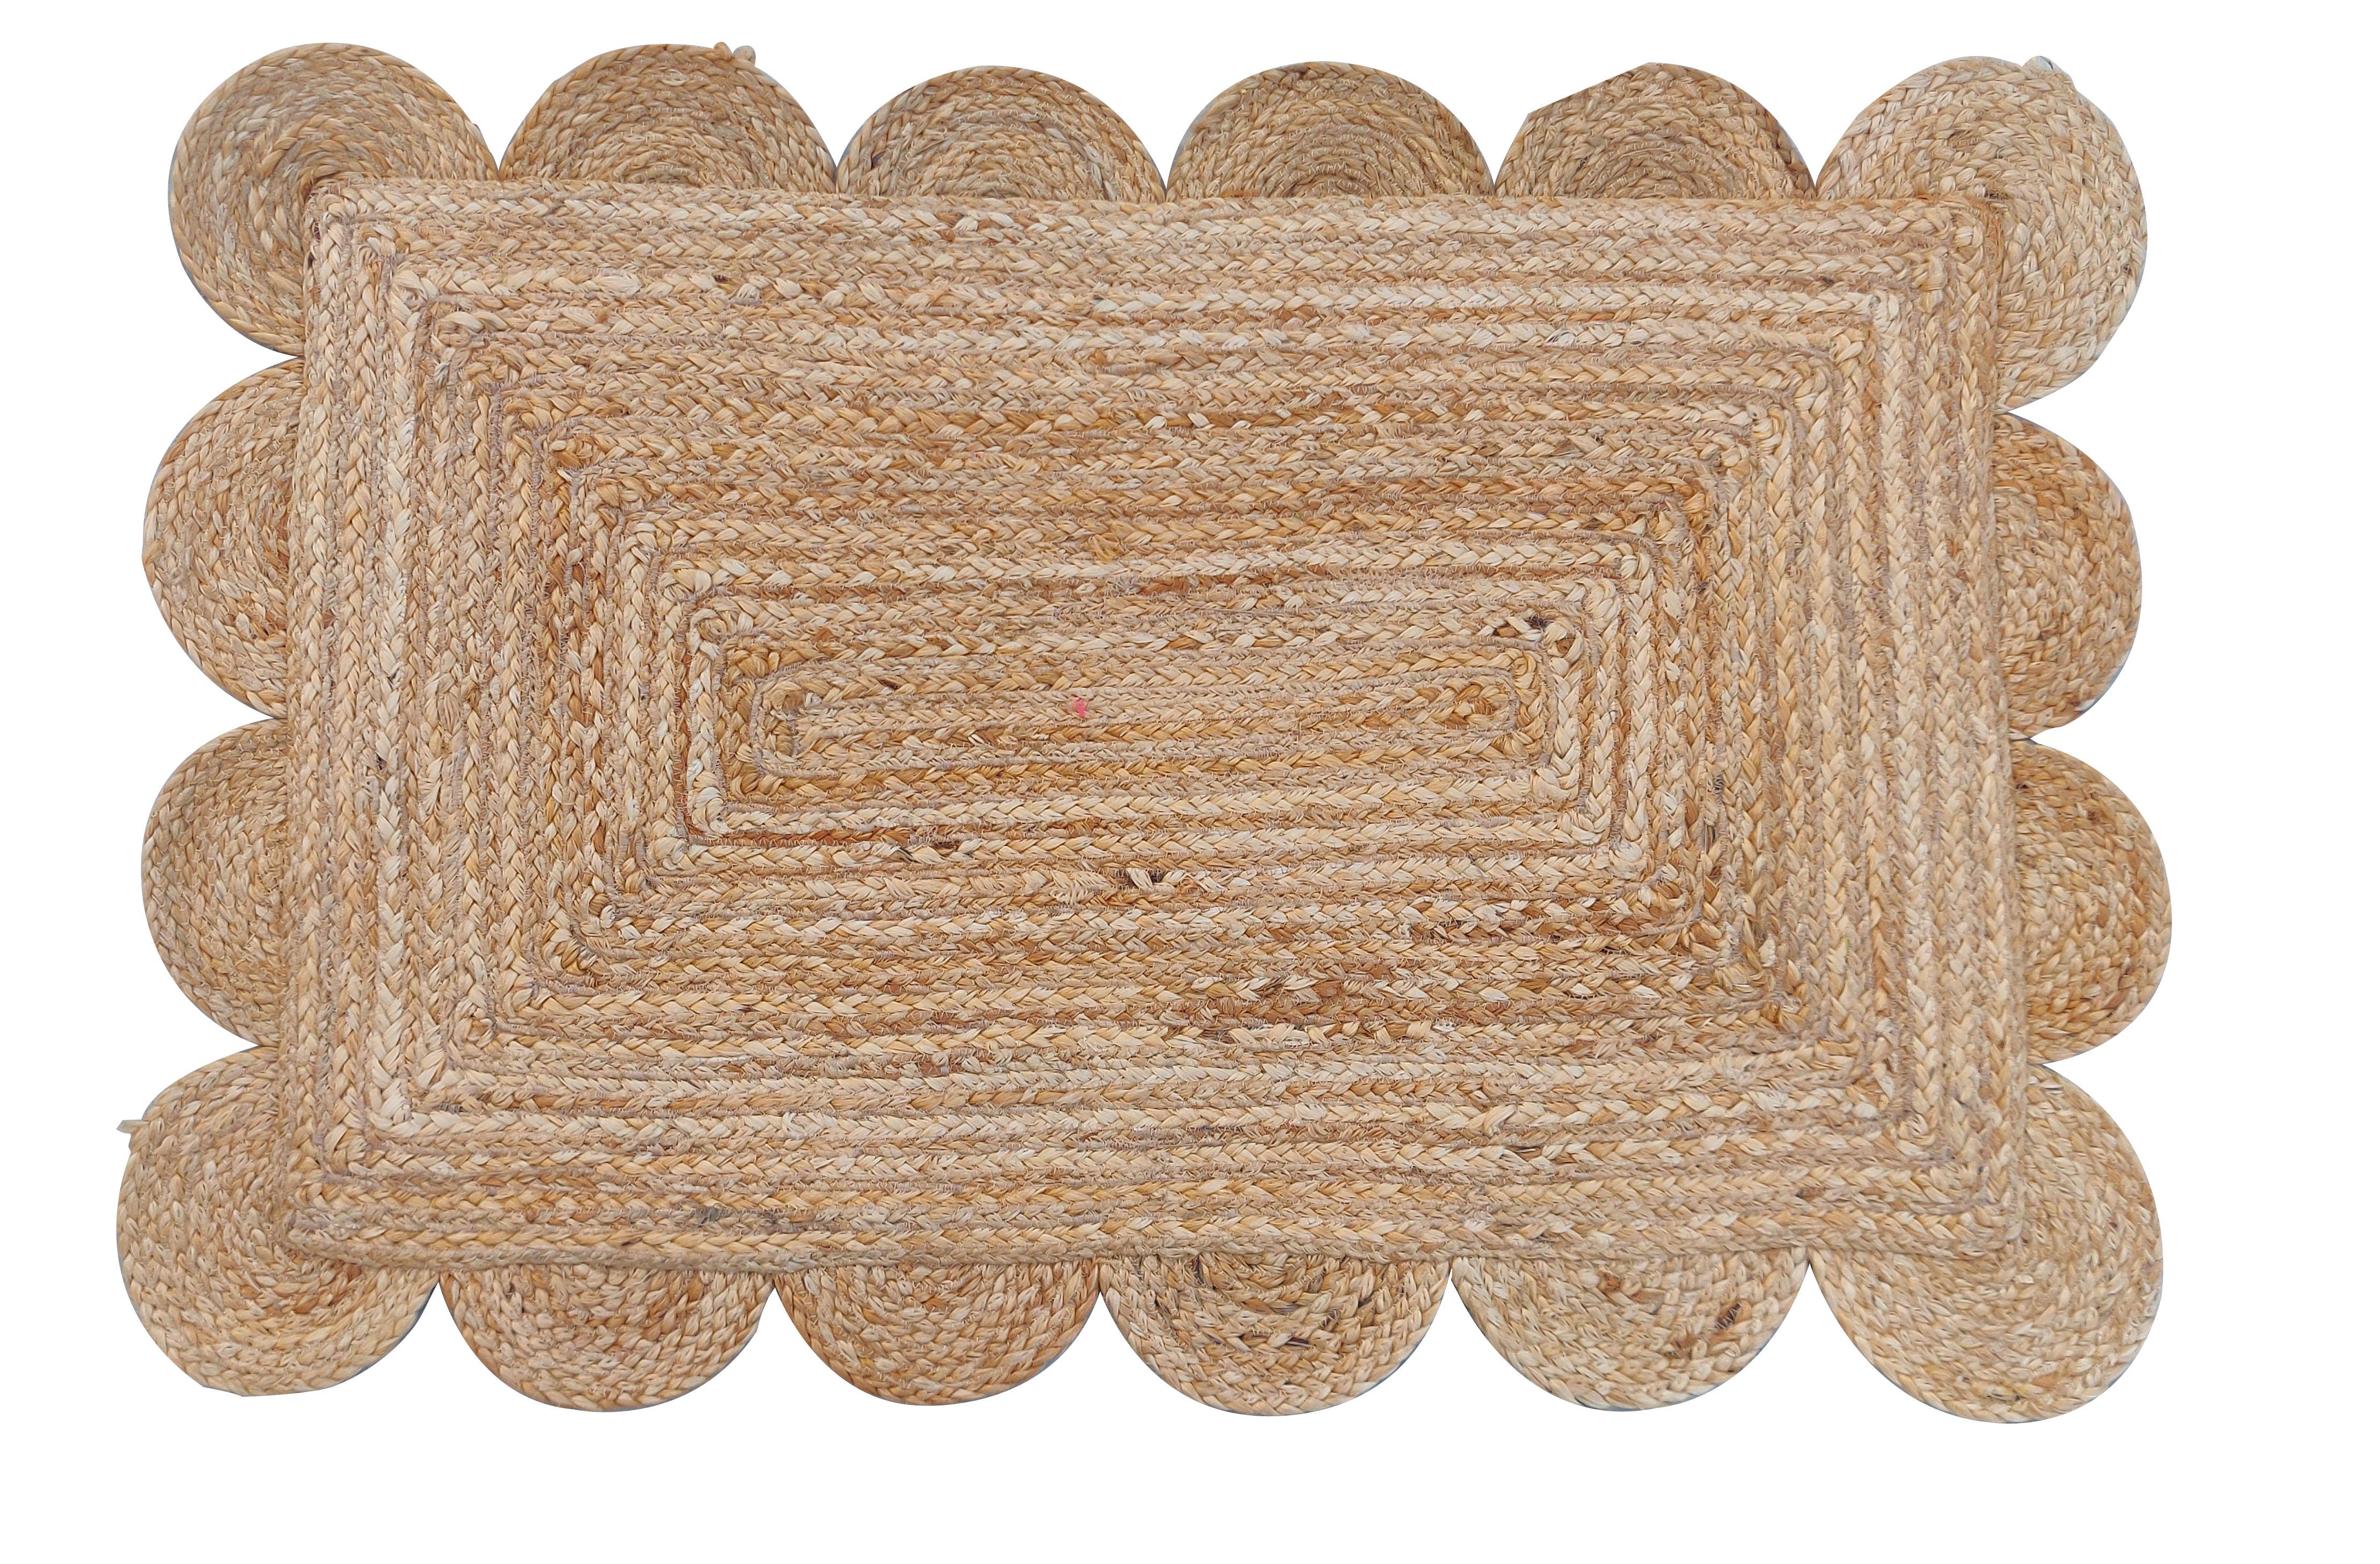 Hand-Woven Handmade Jute Area Flat Weave Rug, 2x3 Solid Jute Scalloped Indian Dhurrie Rug For Sale